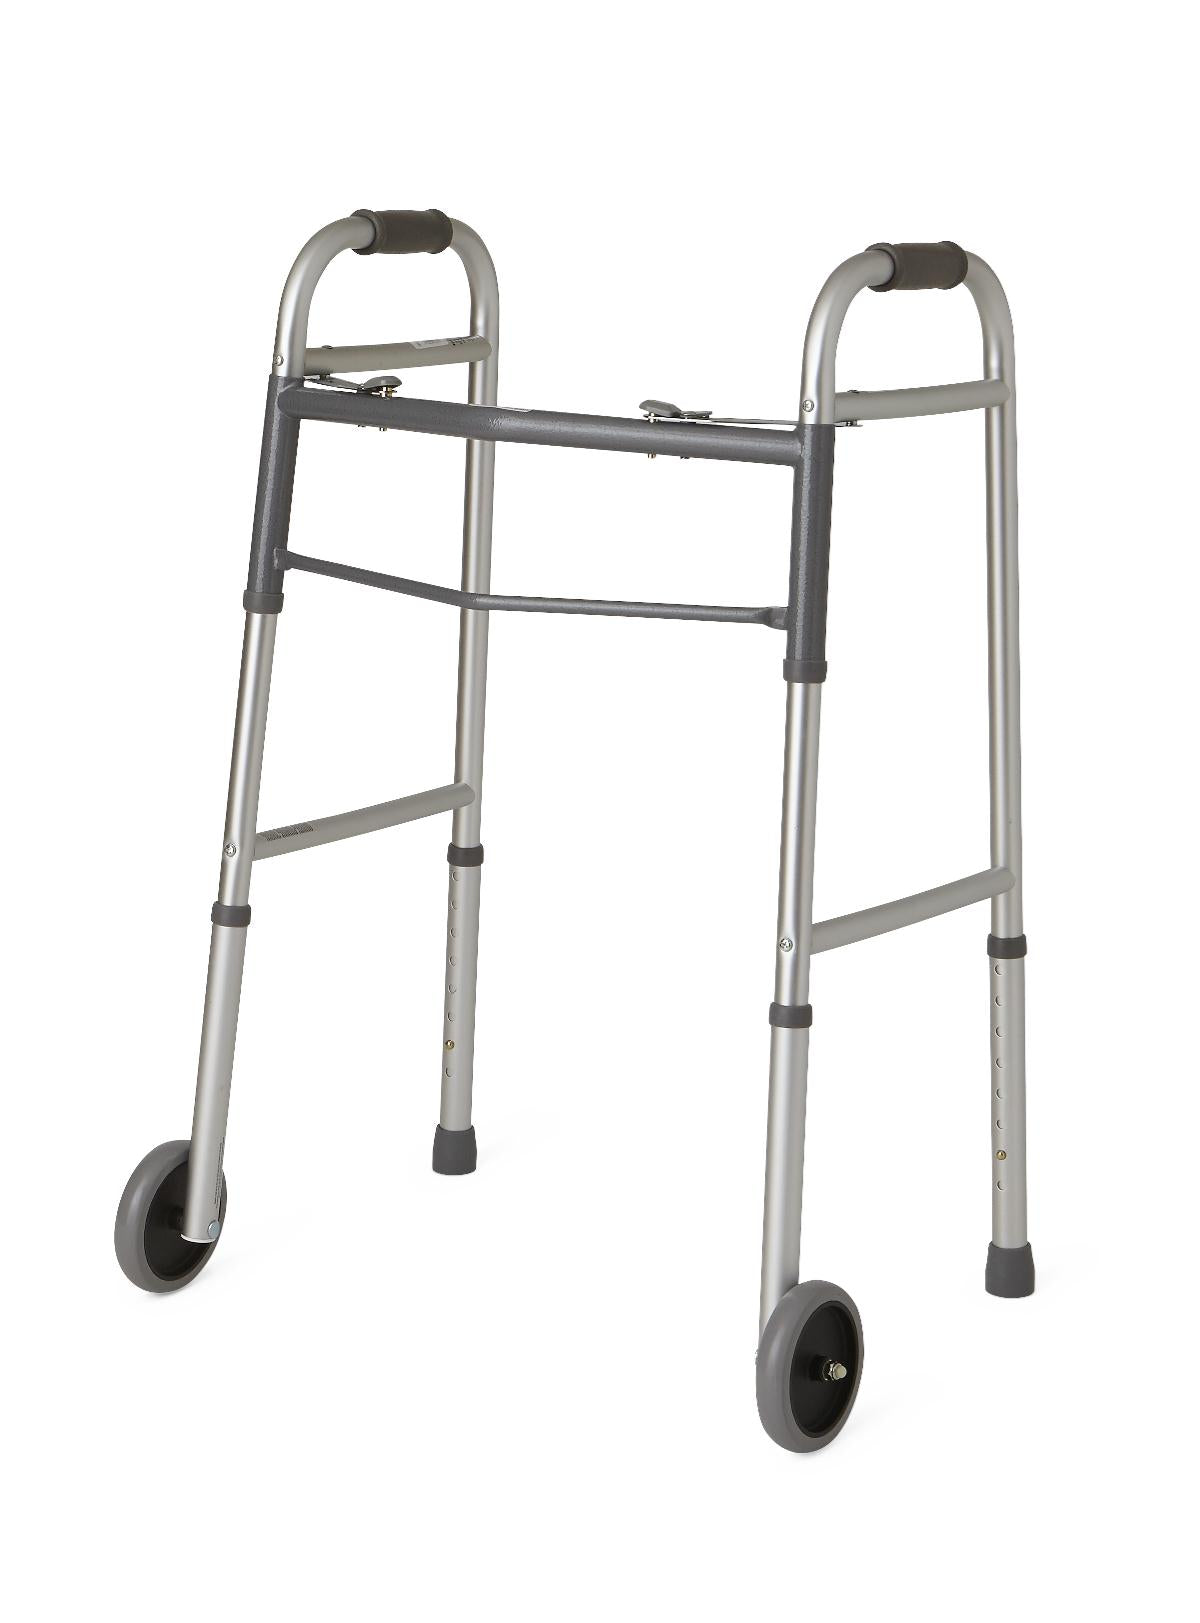 4 Each-Case / Standard / 5.000 IN Patient Safety & Mobility - MEDLINE - Wasatch Medical Supply